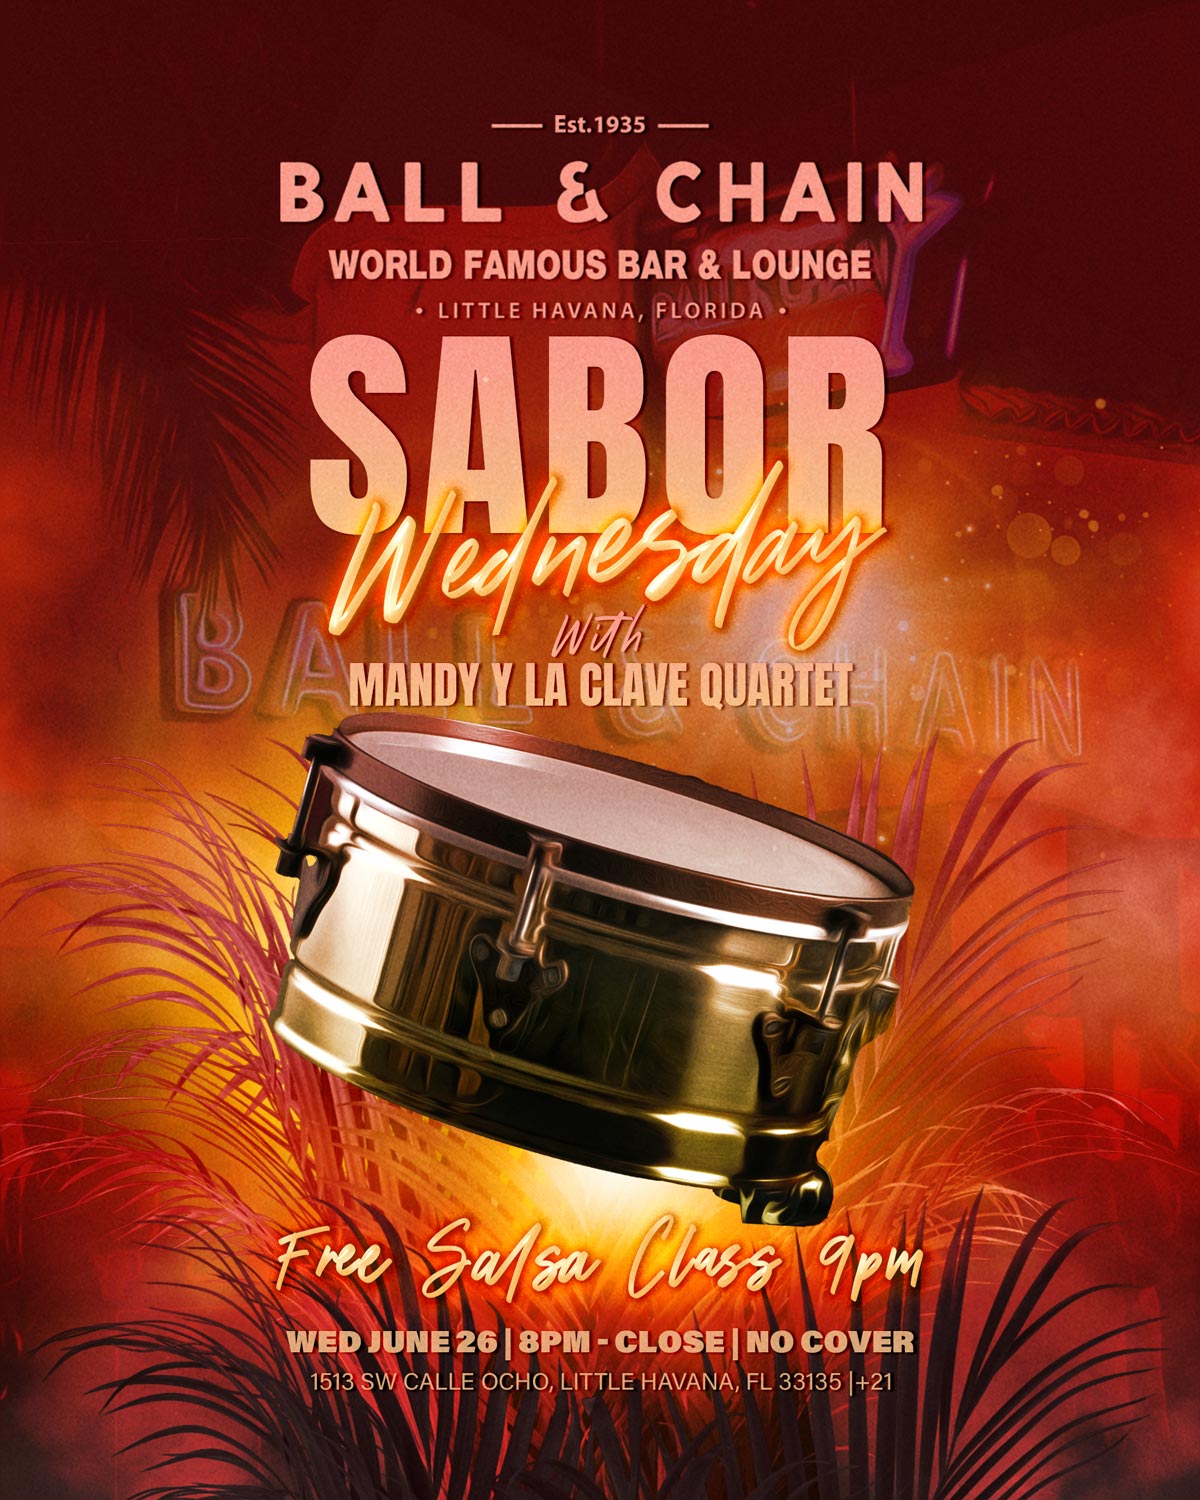 Steel drum floating over a ball and chain backdrop